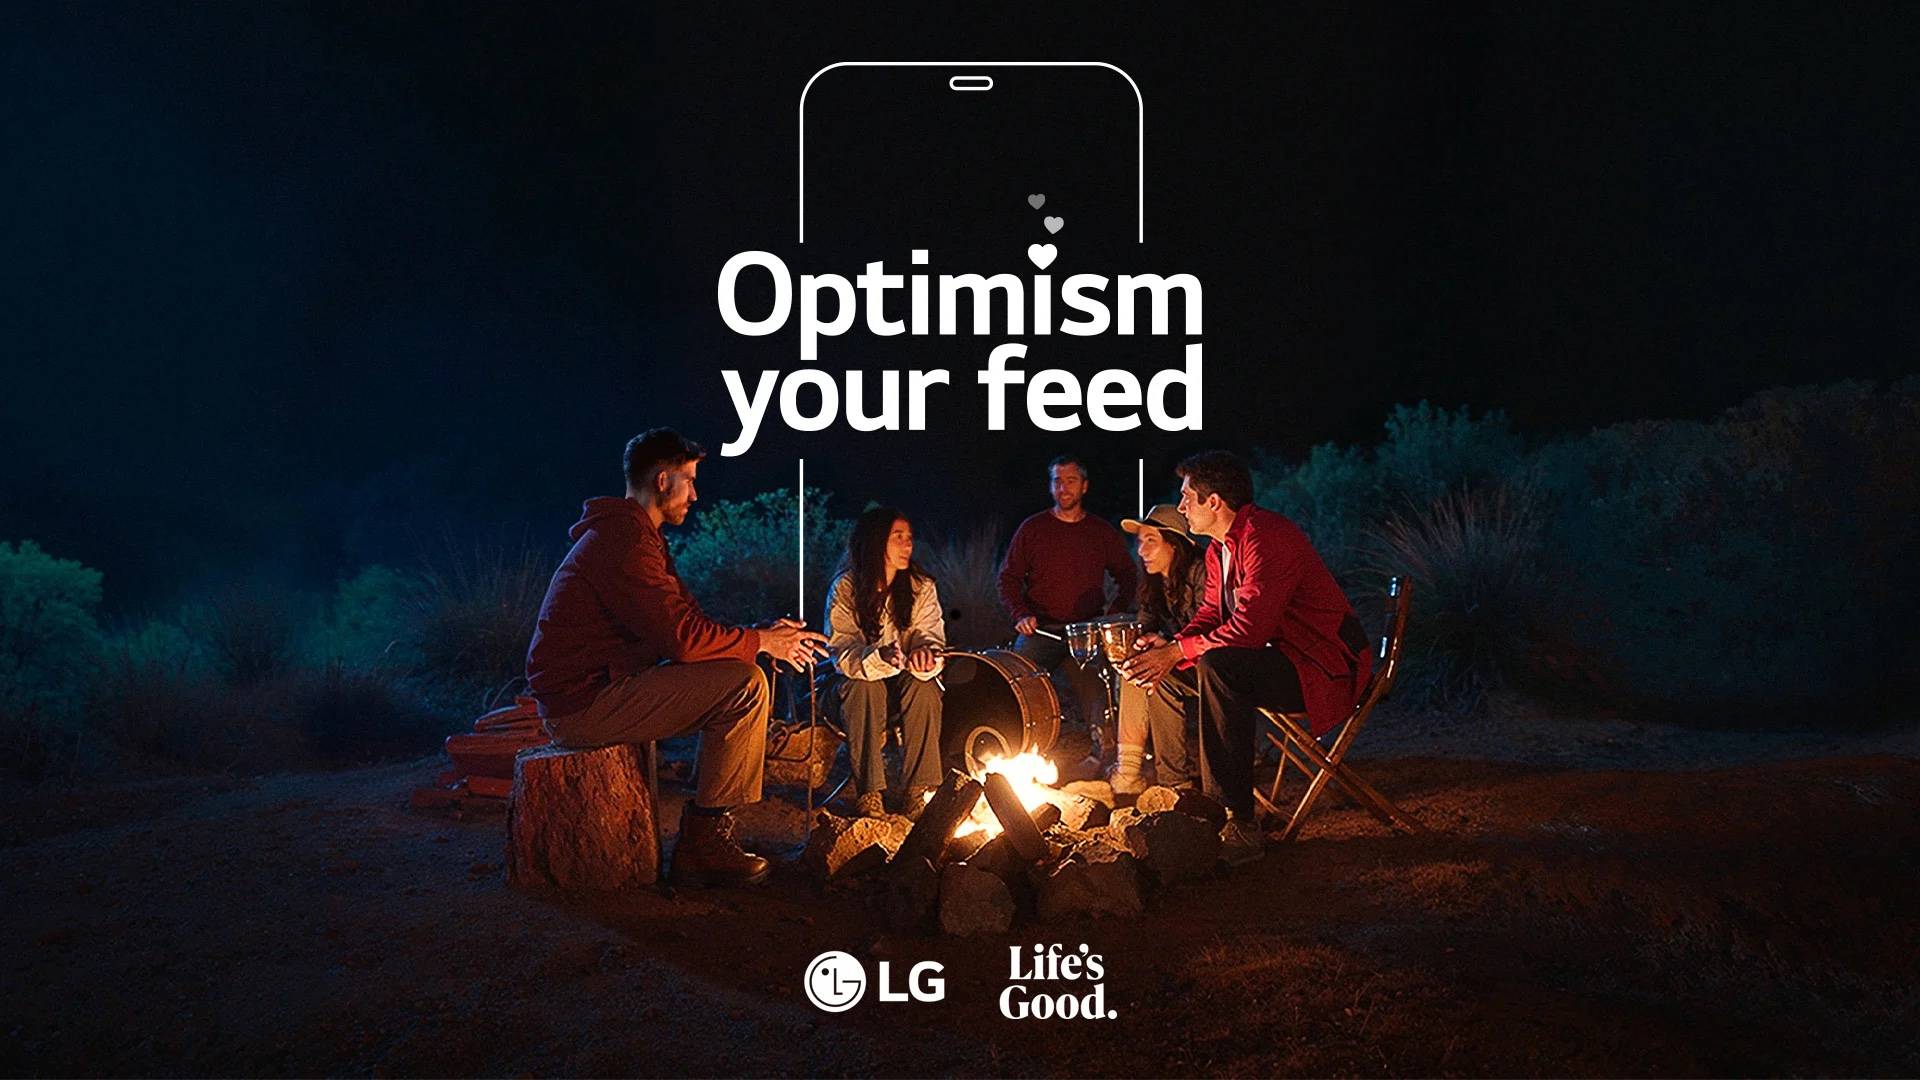 LG Optimism Your Feed